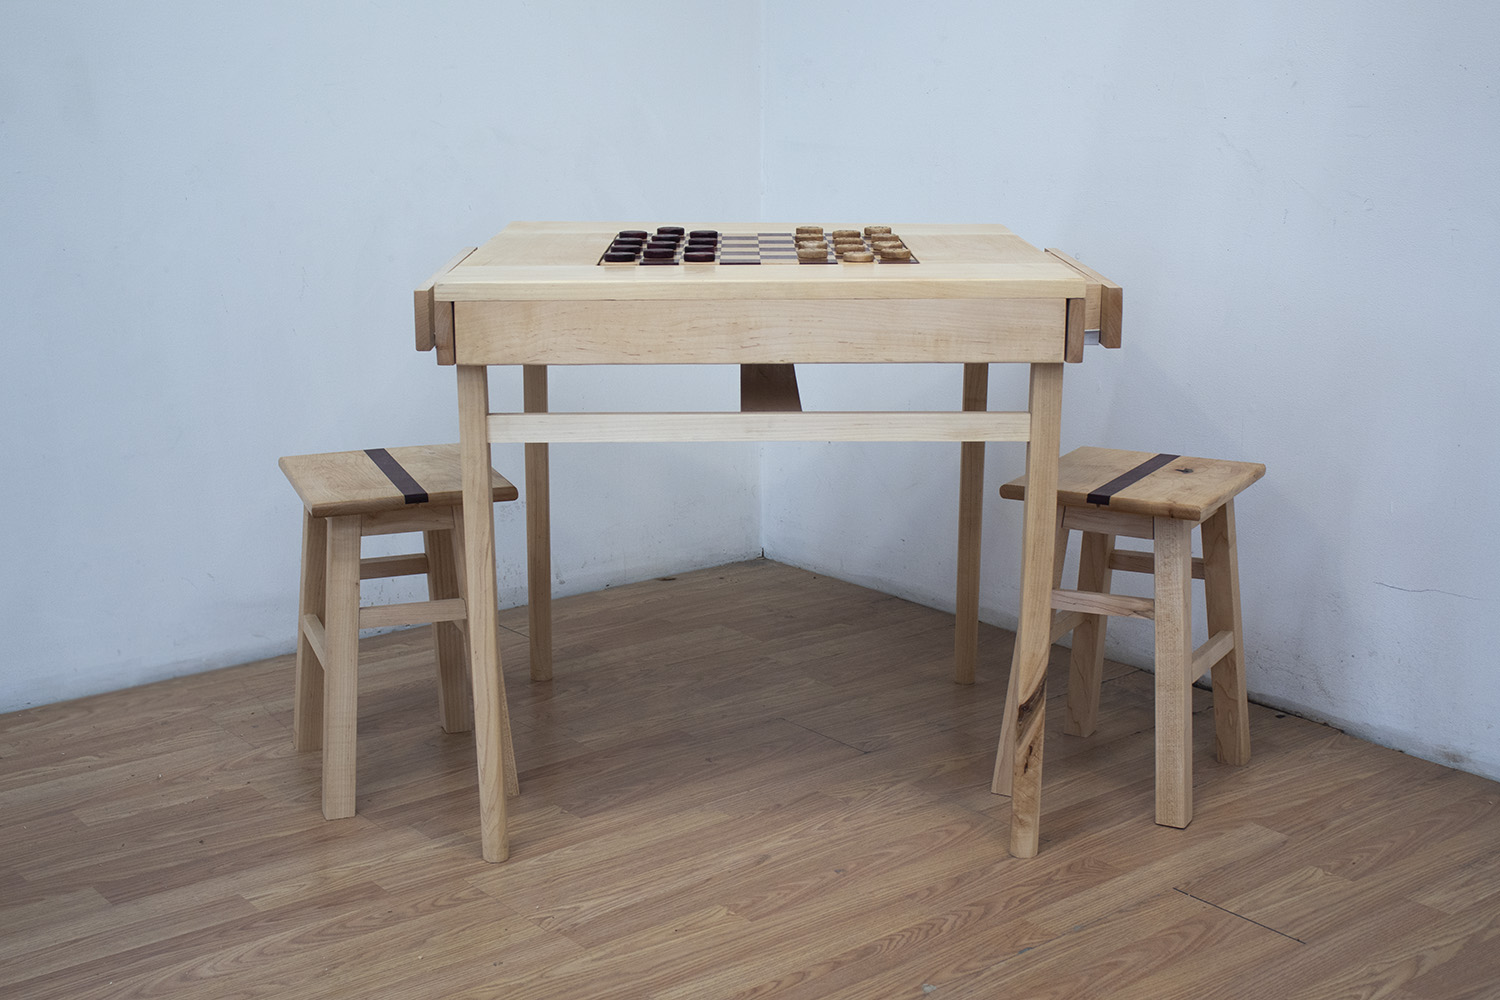 A simple table constructed with maple wood. The center contains an inlaid checkerboard constructed with maple and purple heart.